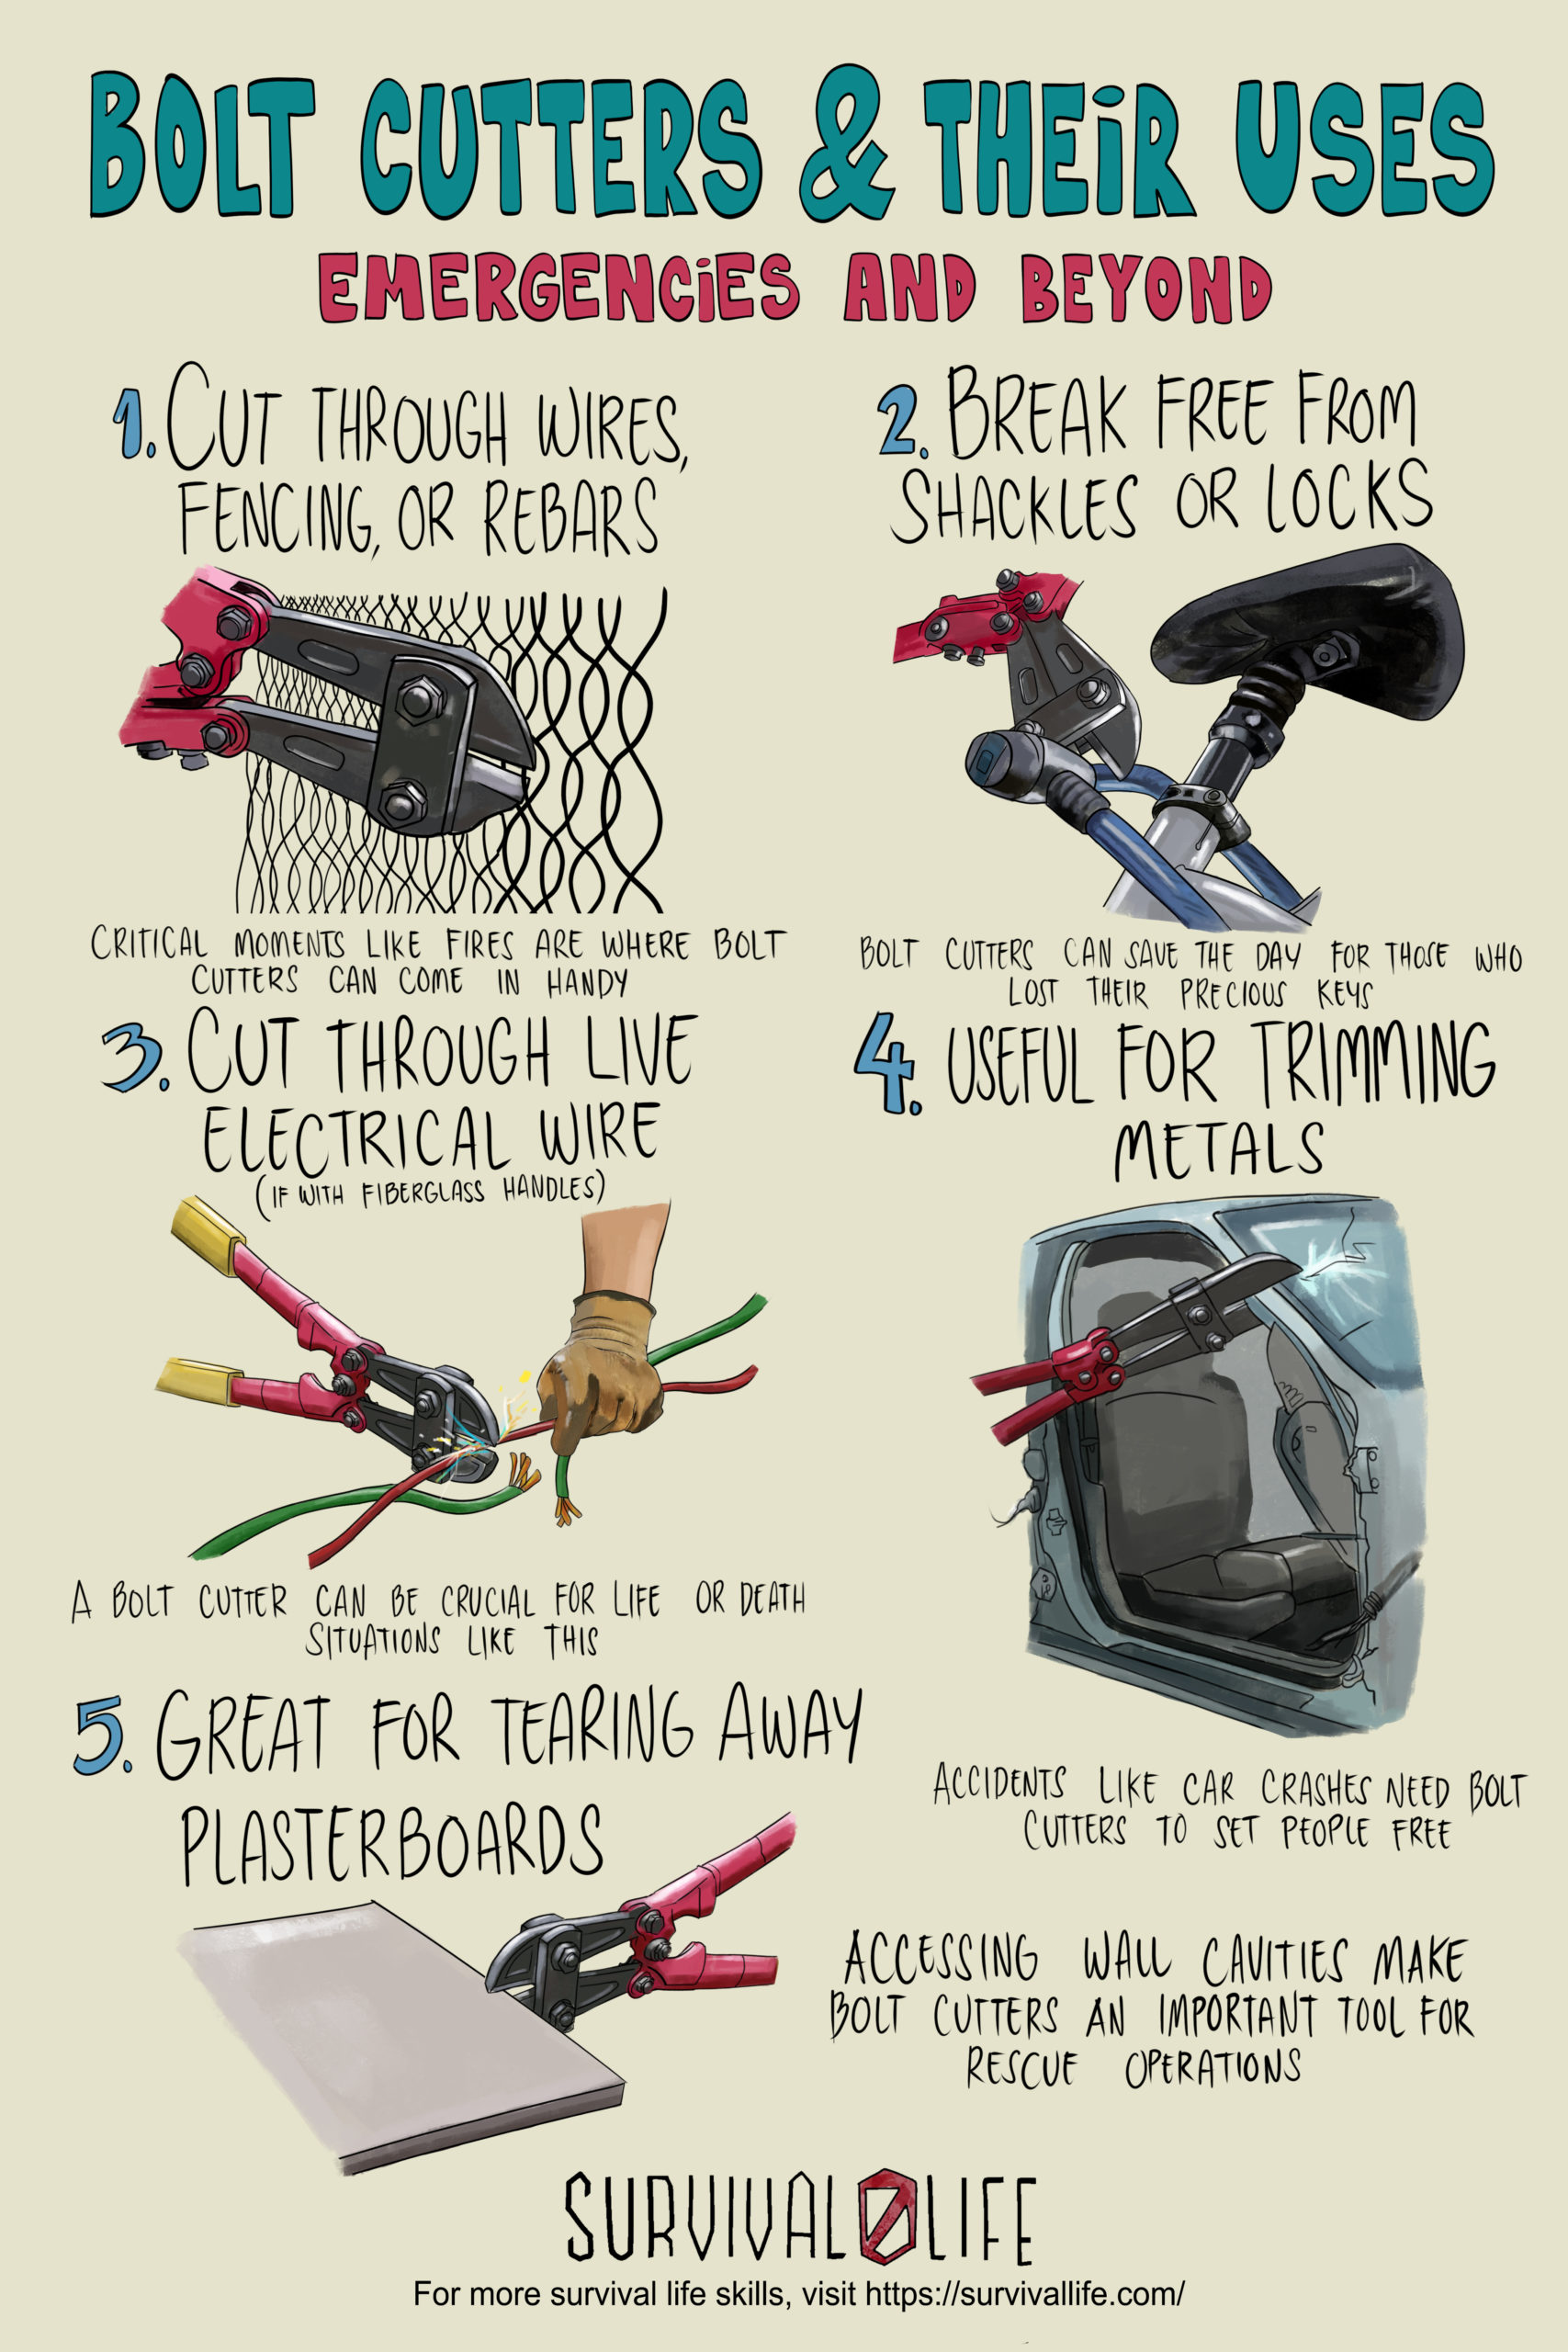 Ways How Bolt Cutters Can Be Useful During Emergencies